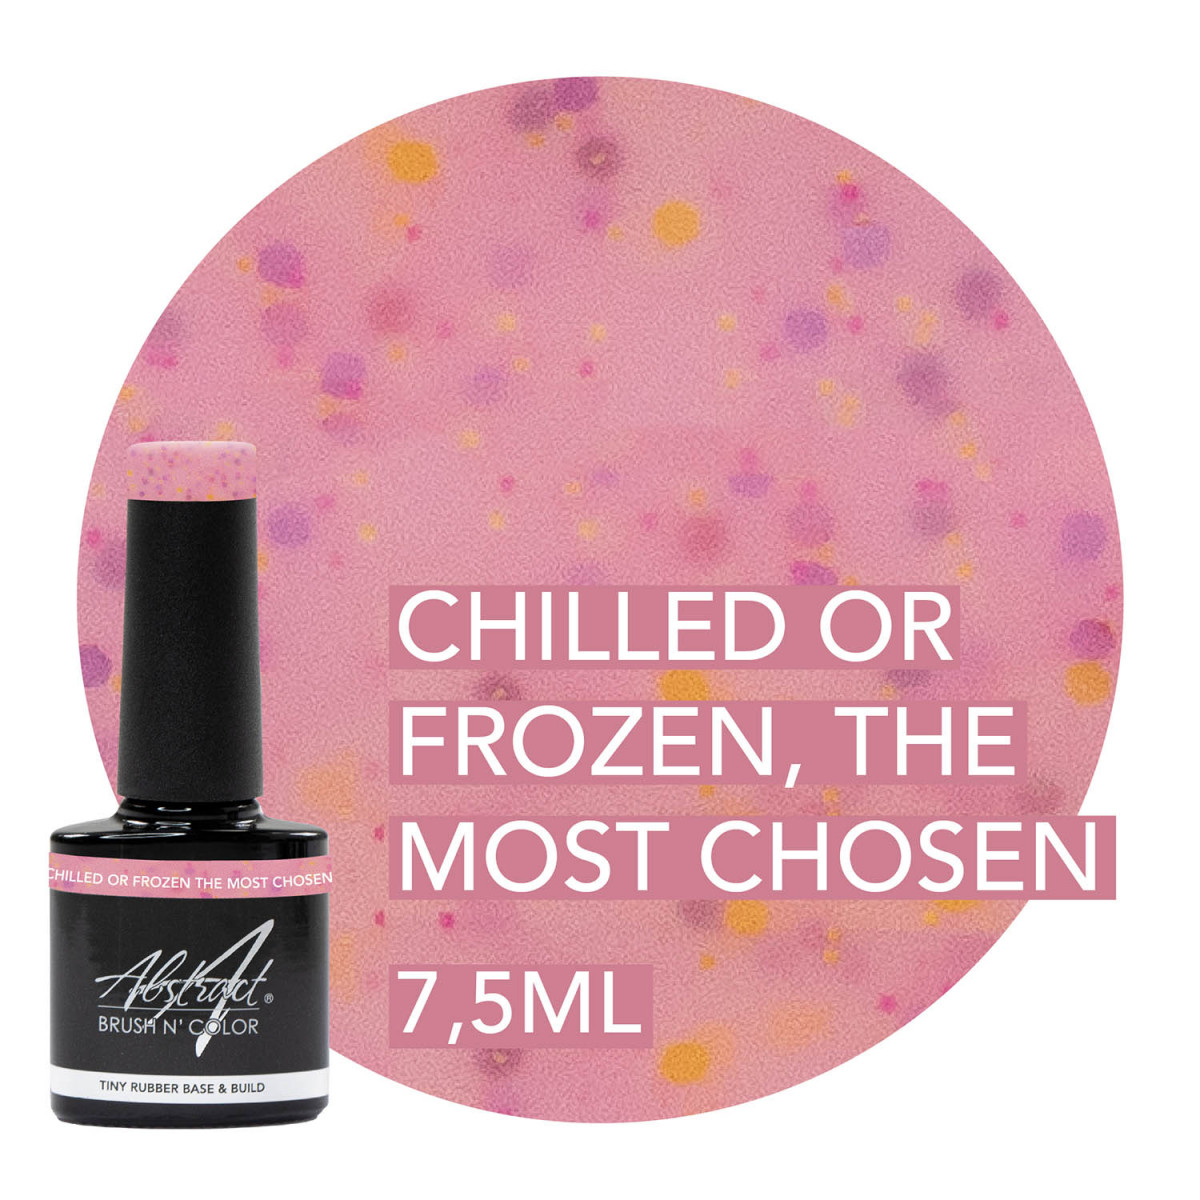 PRE-COMMANDE Chilled Or Frozen The Most Chosen - TINY Rubber Base & Build Gel Abstract